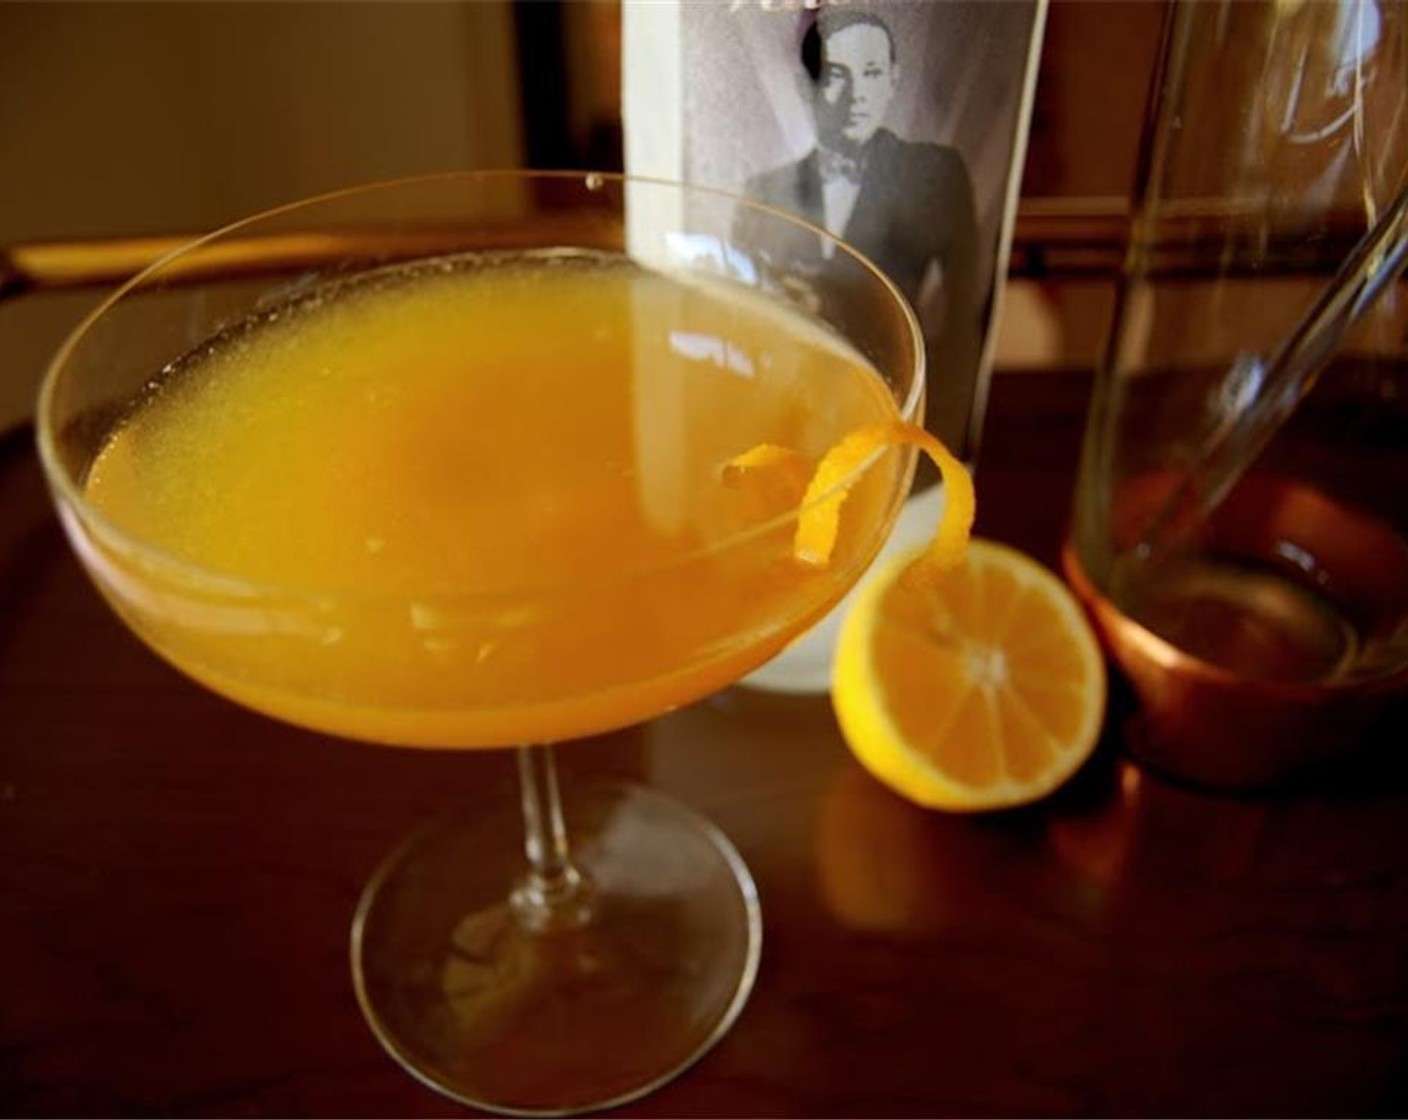 step 2 Pour over a strainer into a chilled glass and garnish with an orange twist. Enjoy!